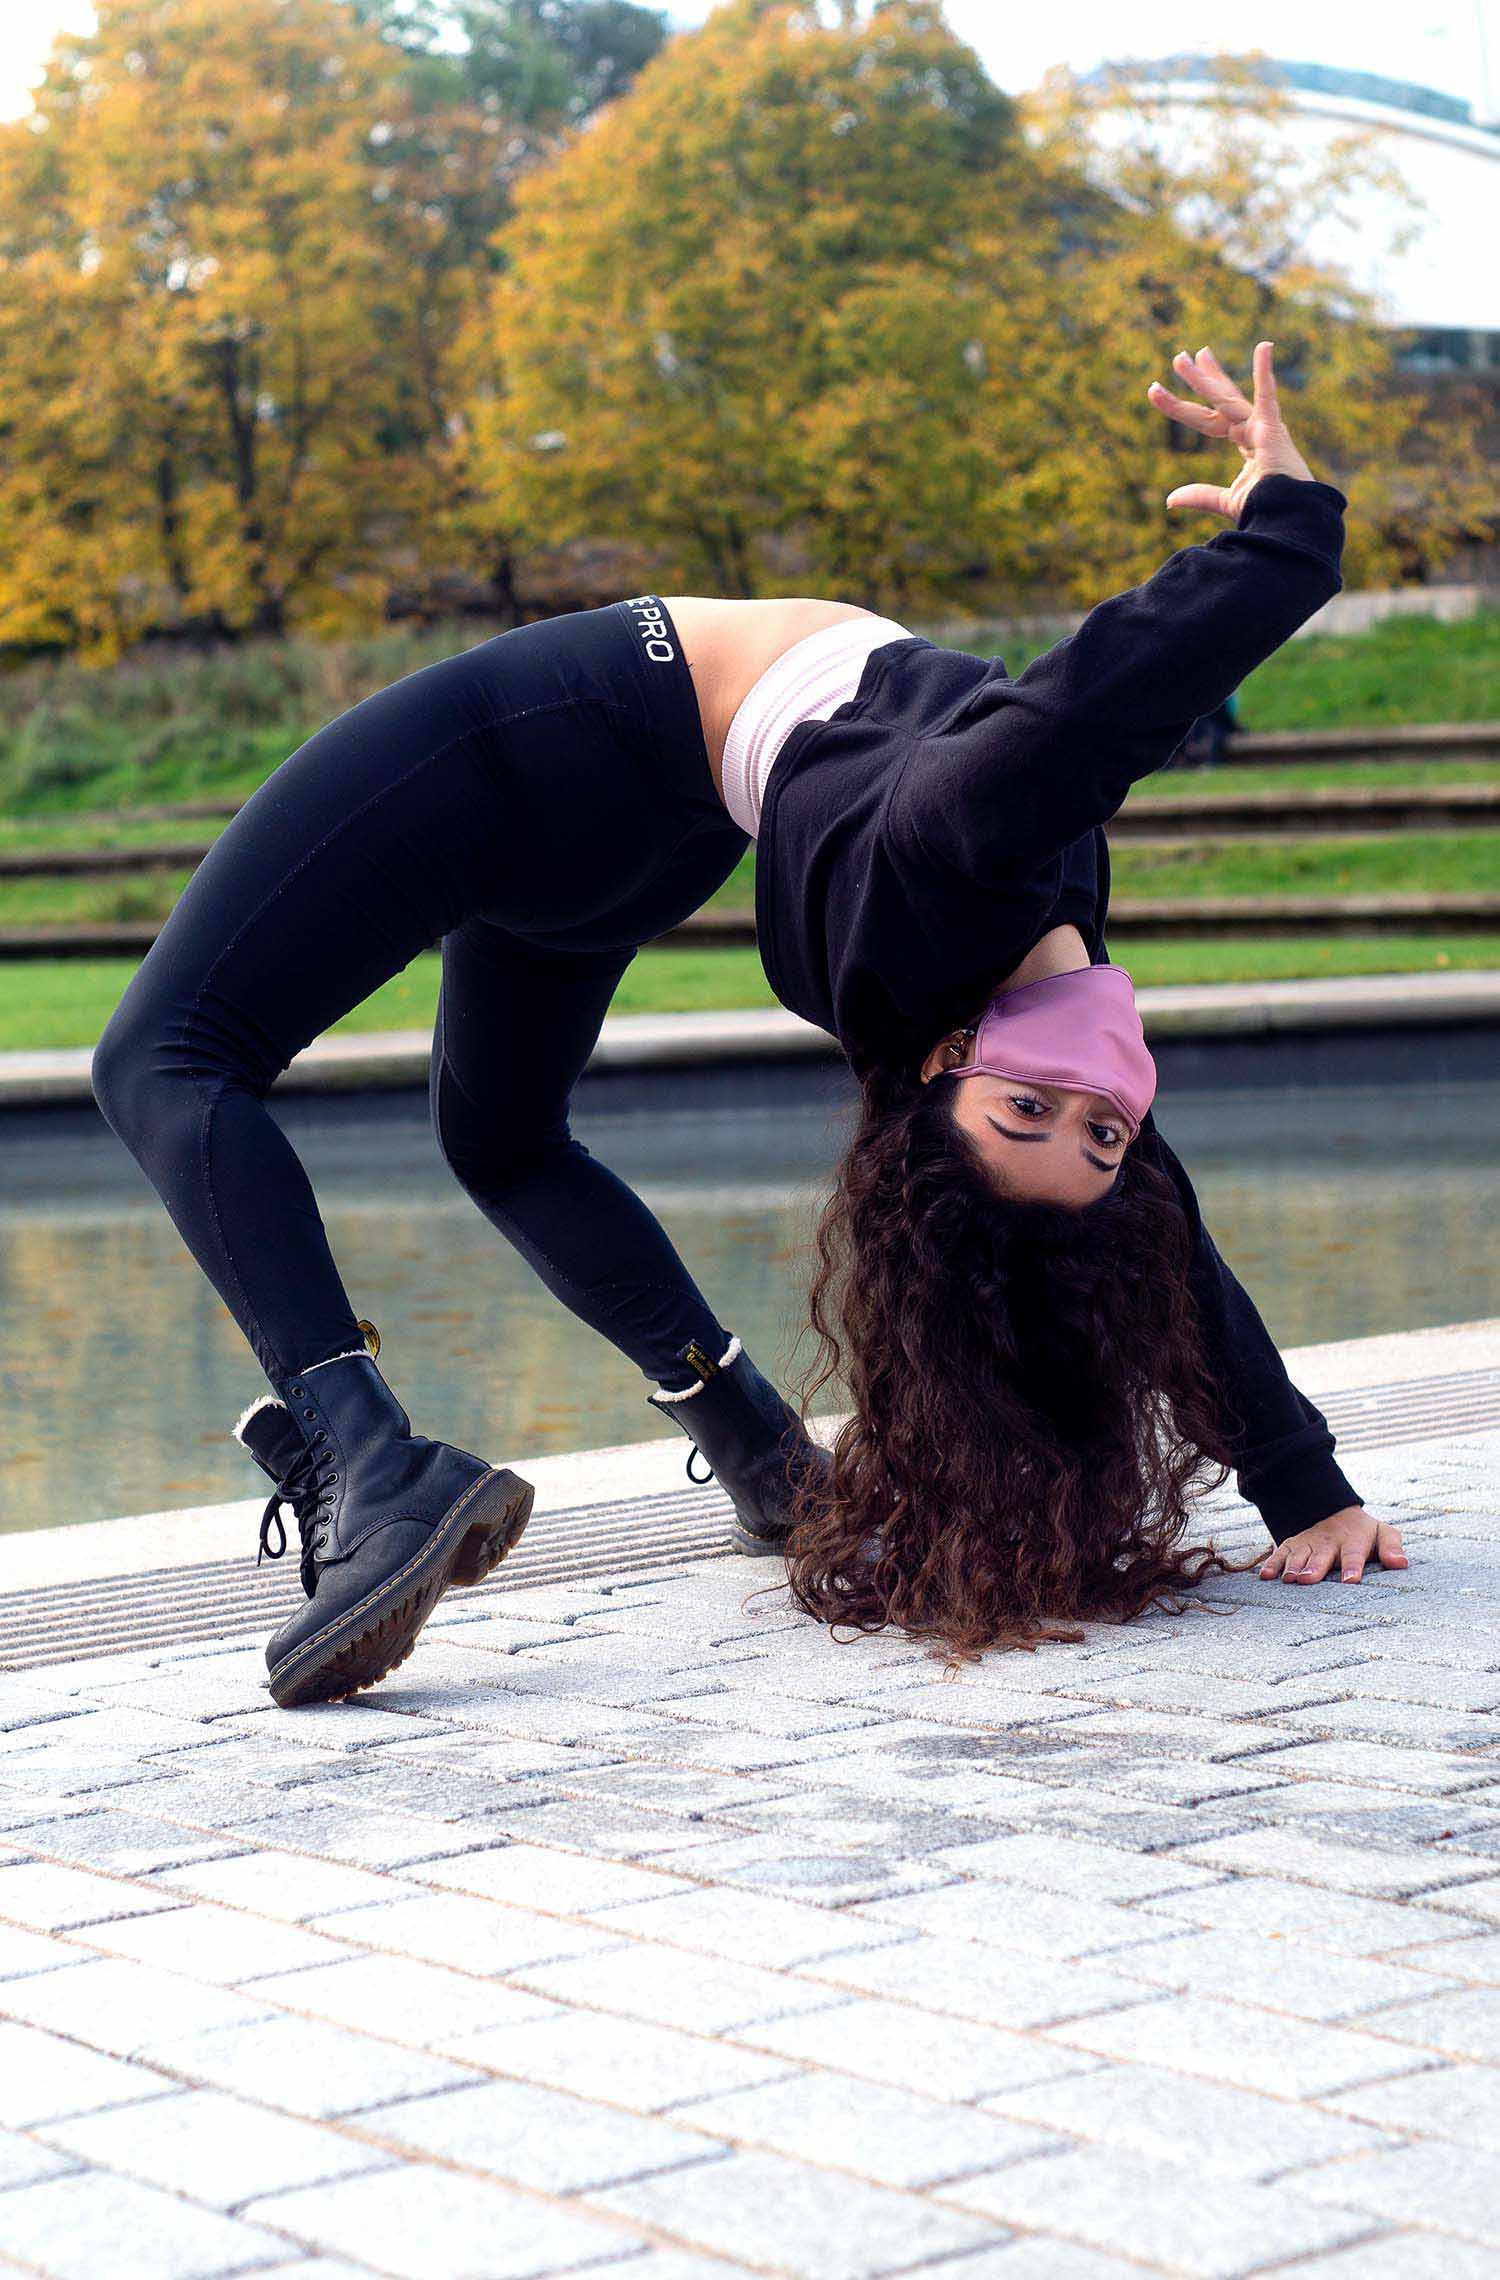 A dancer bent over in a bridge in front of trees and water.